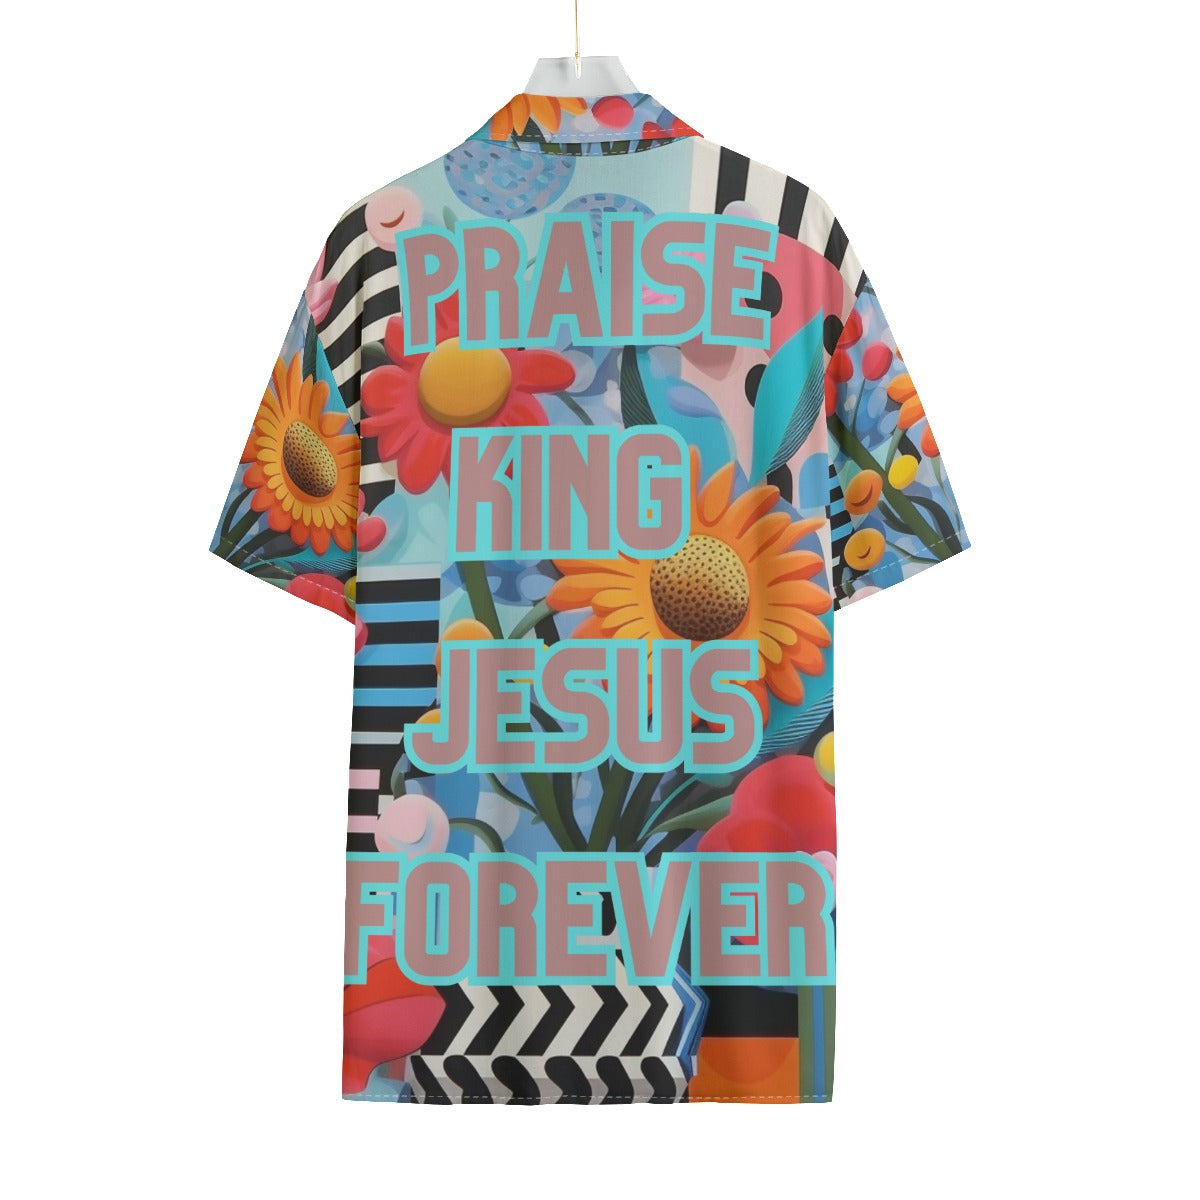 Praise King Jesus Forever Rayon Shirt With Pocket